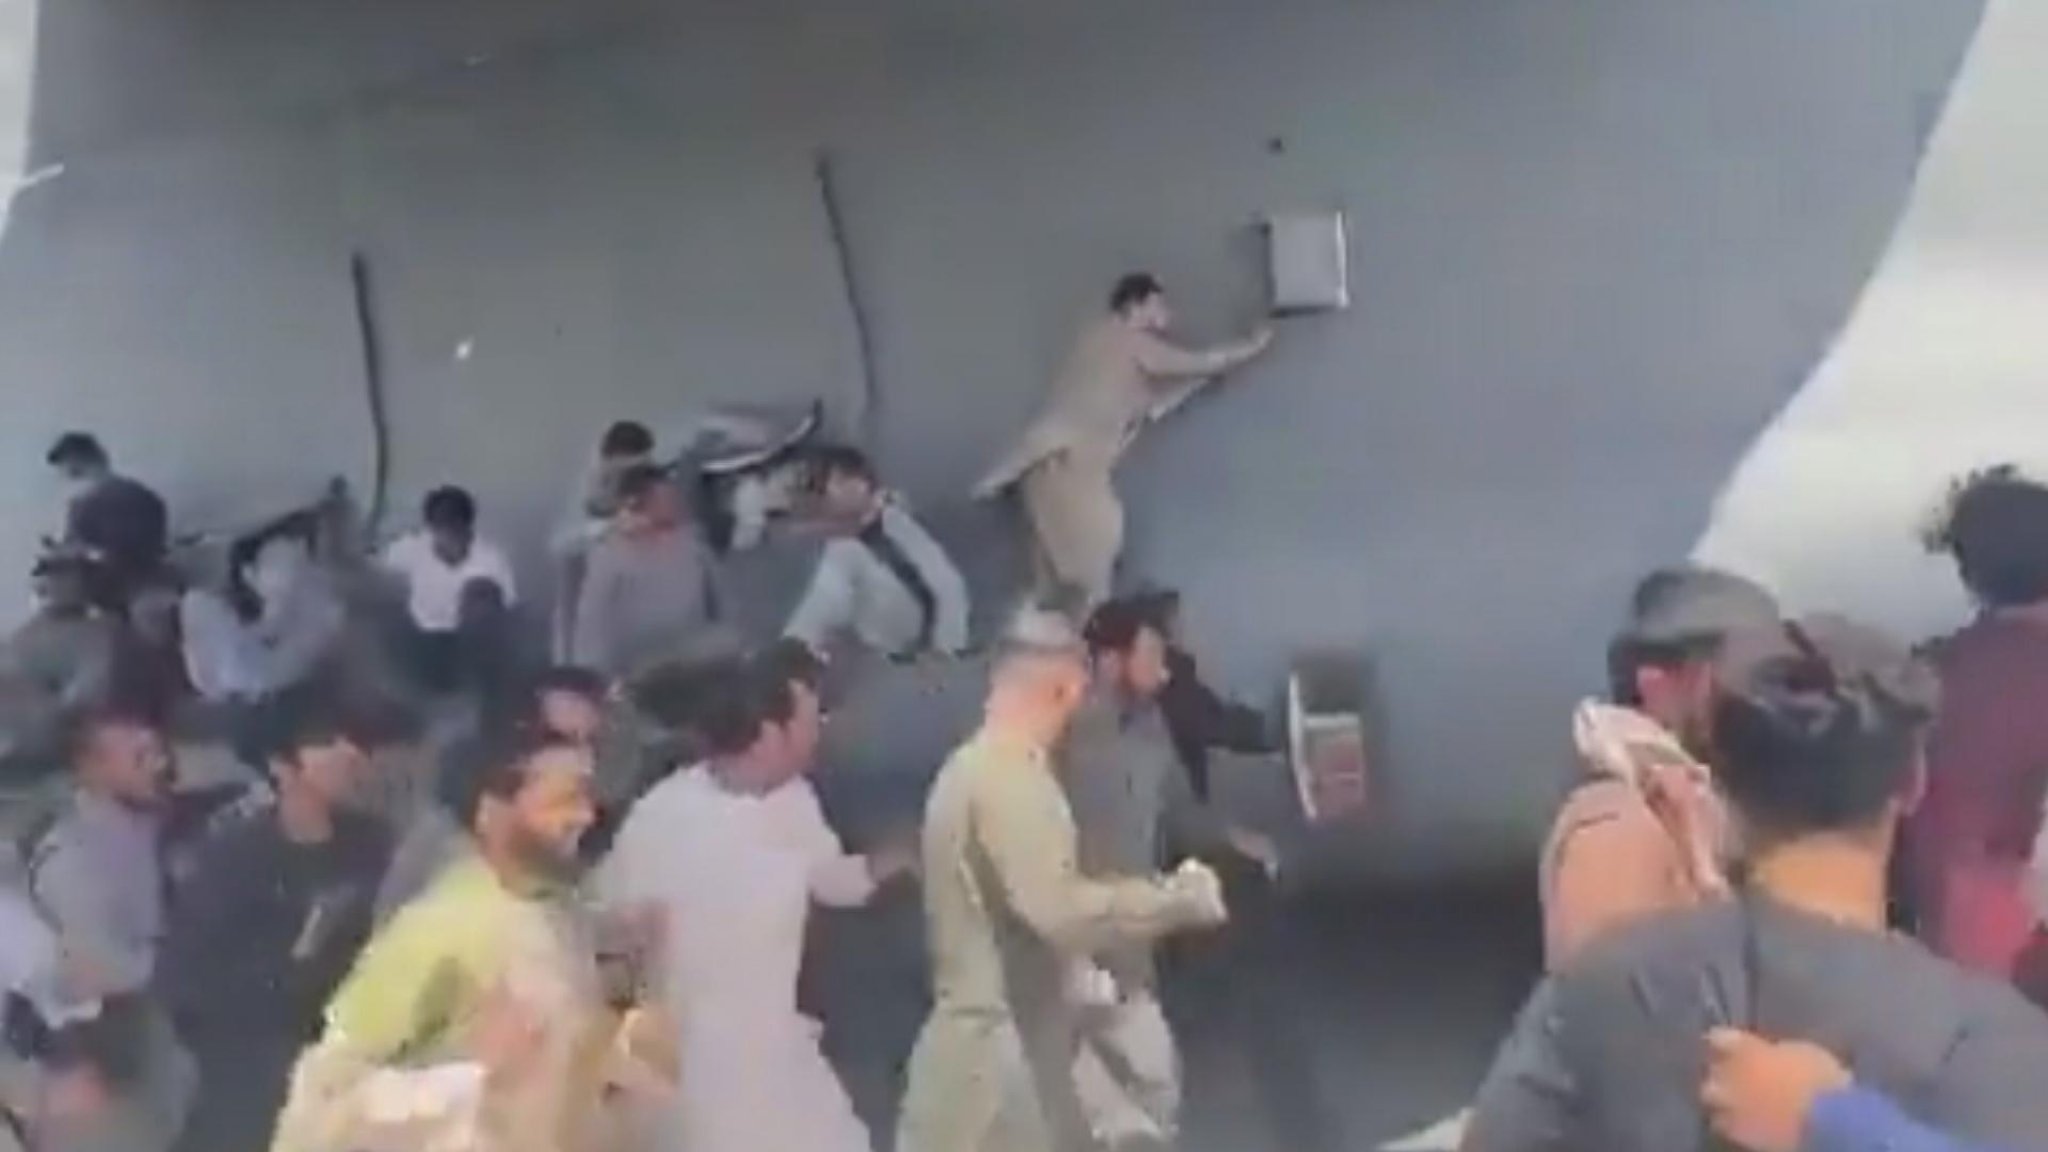 Afghans desperately climb on the fuselage The plane takes off